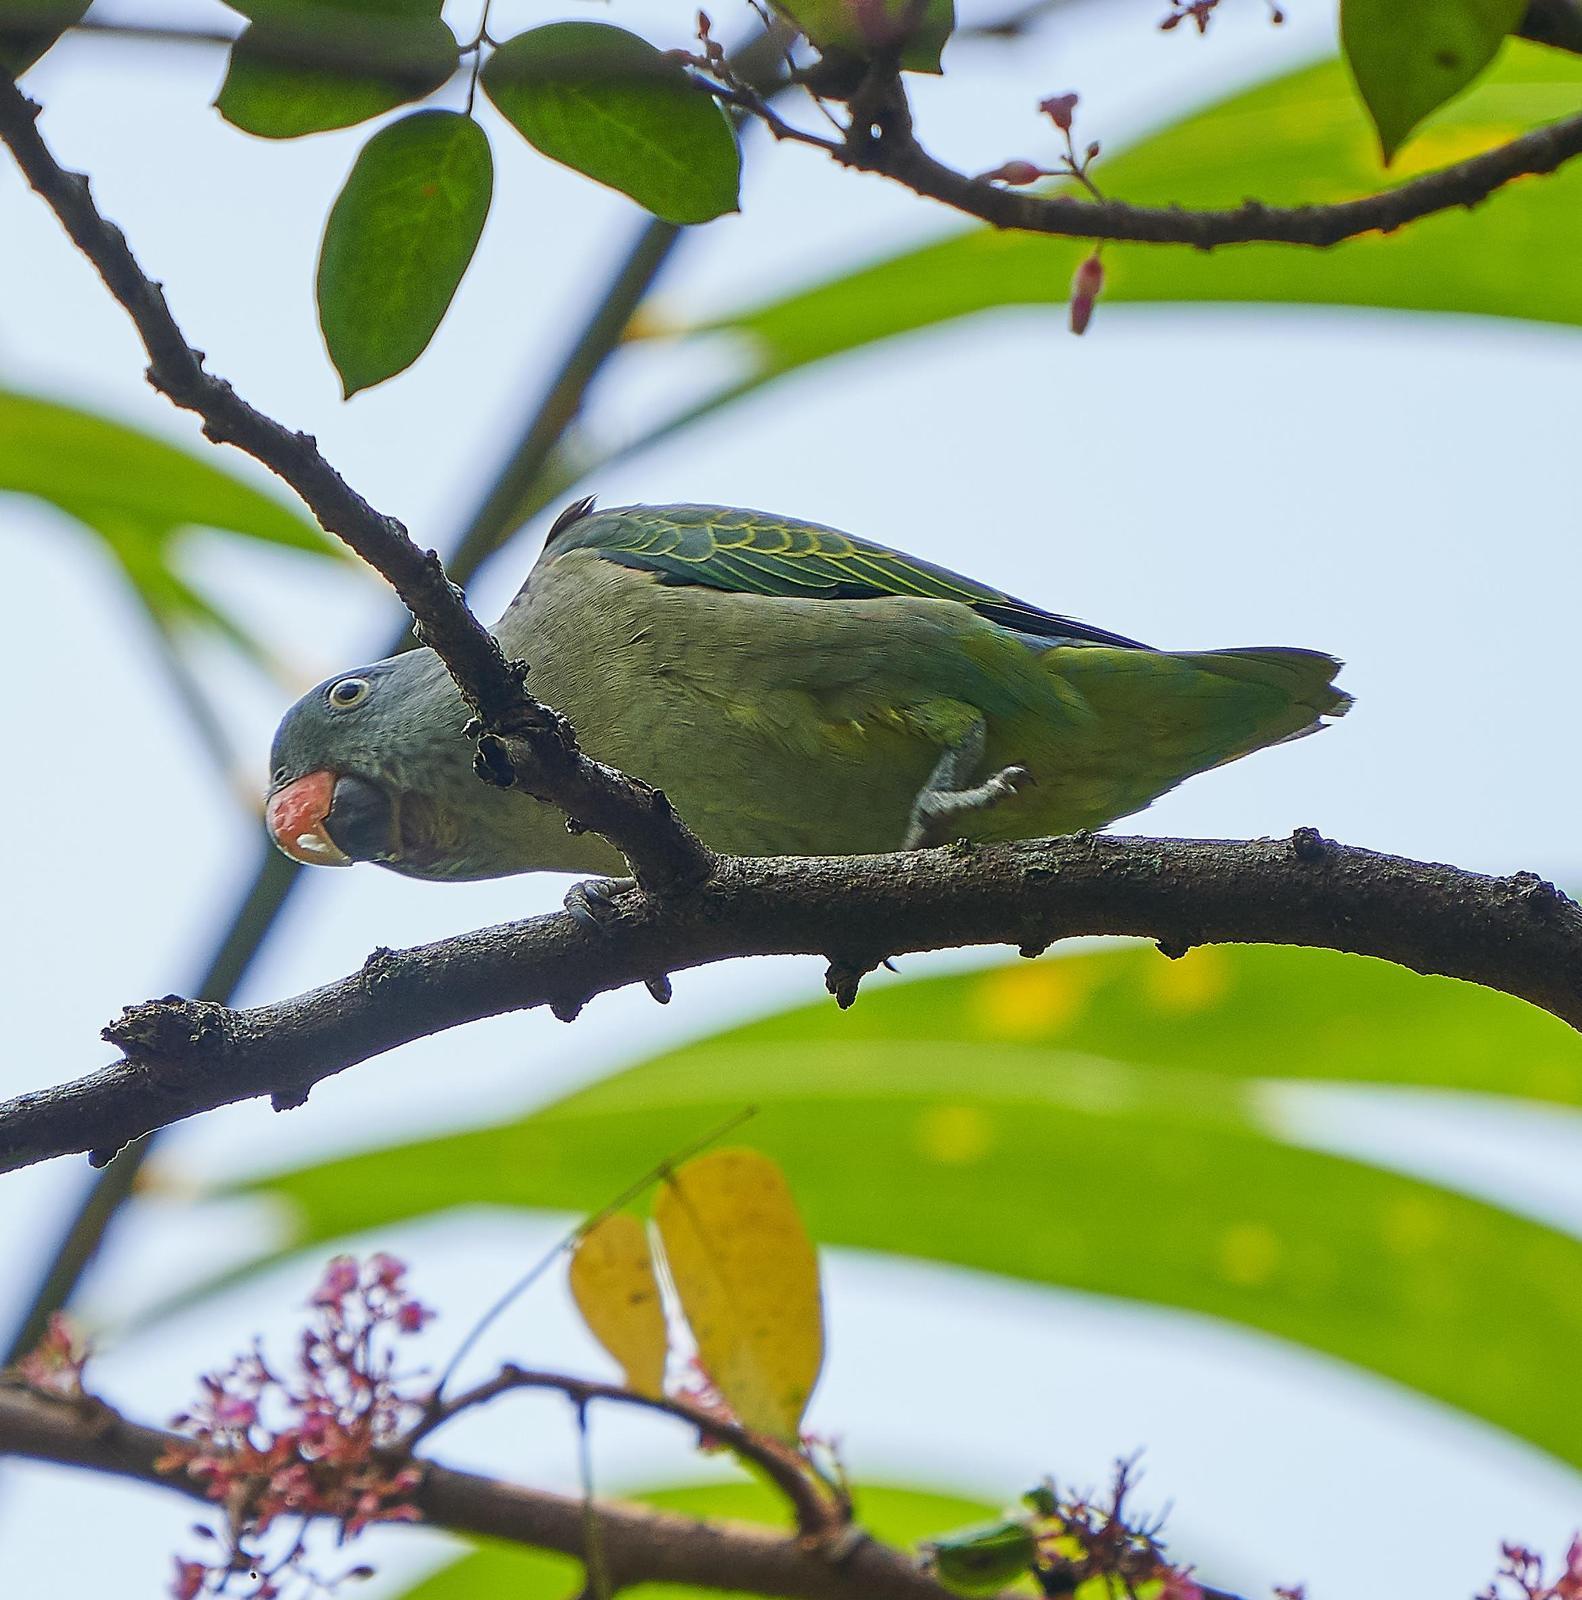 Blue-rumped Parrot Photo by Steven Cheong